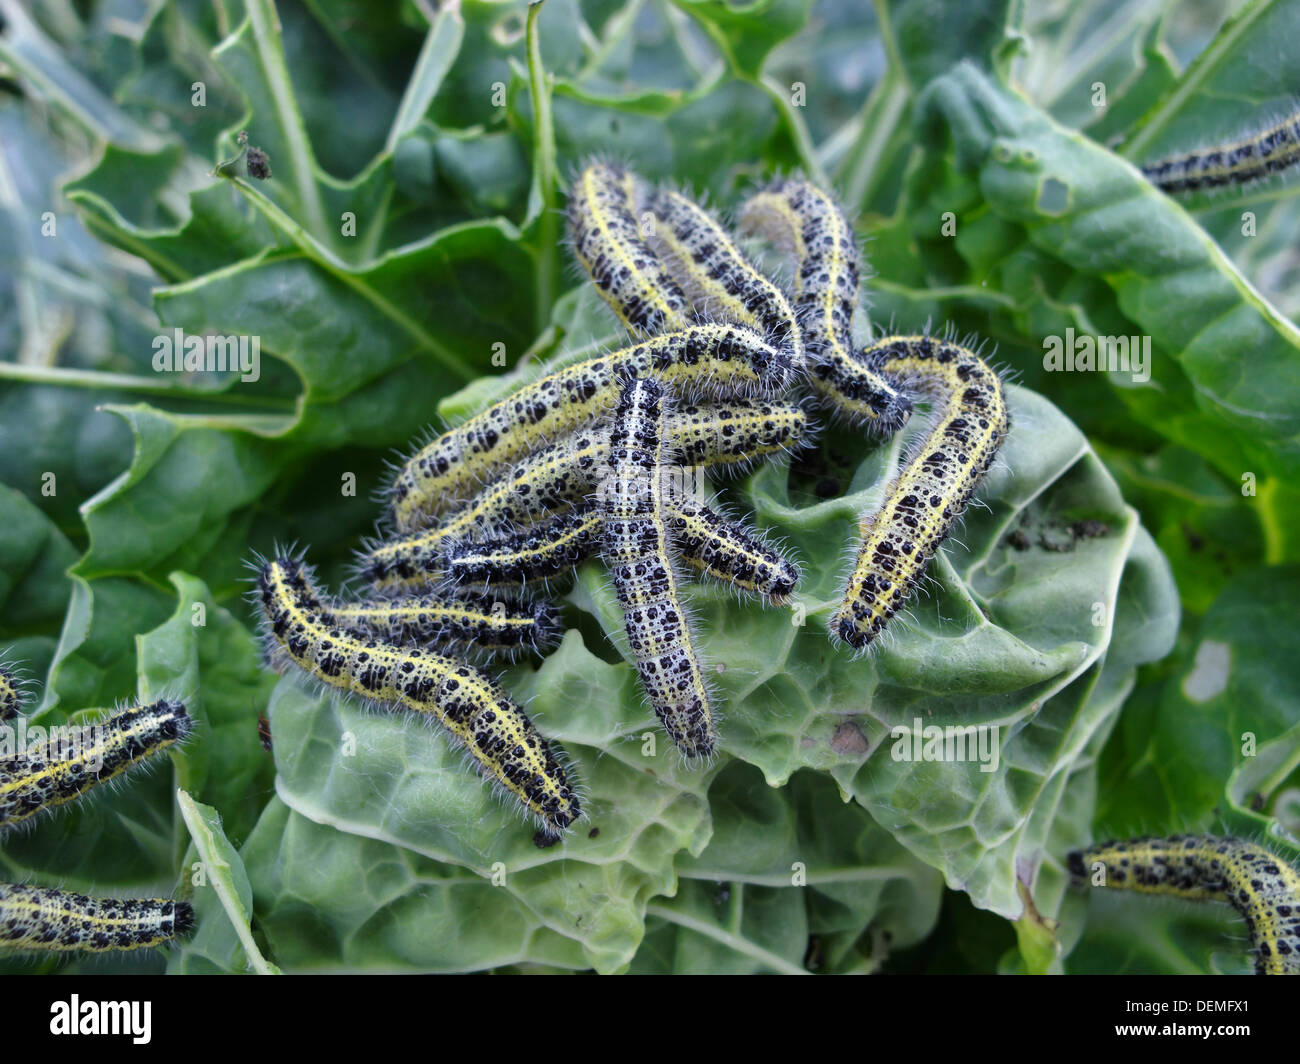 An infestation of caterpillars (from the Large White Cabbage butterfly - Pieris brassicae) devouring a gardener's unprotected Brussels Sprouts plant in Lincolnshire, UK. Stock Photo